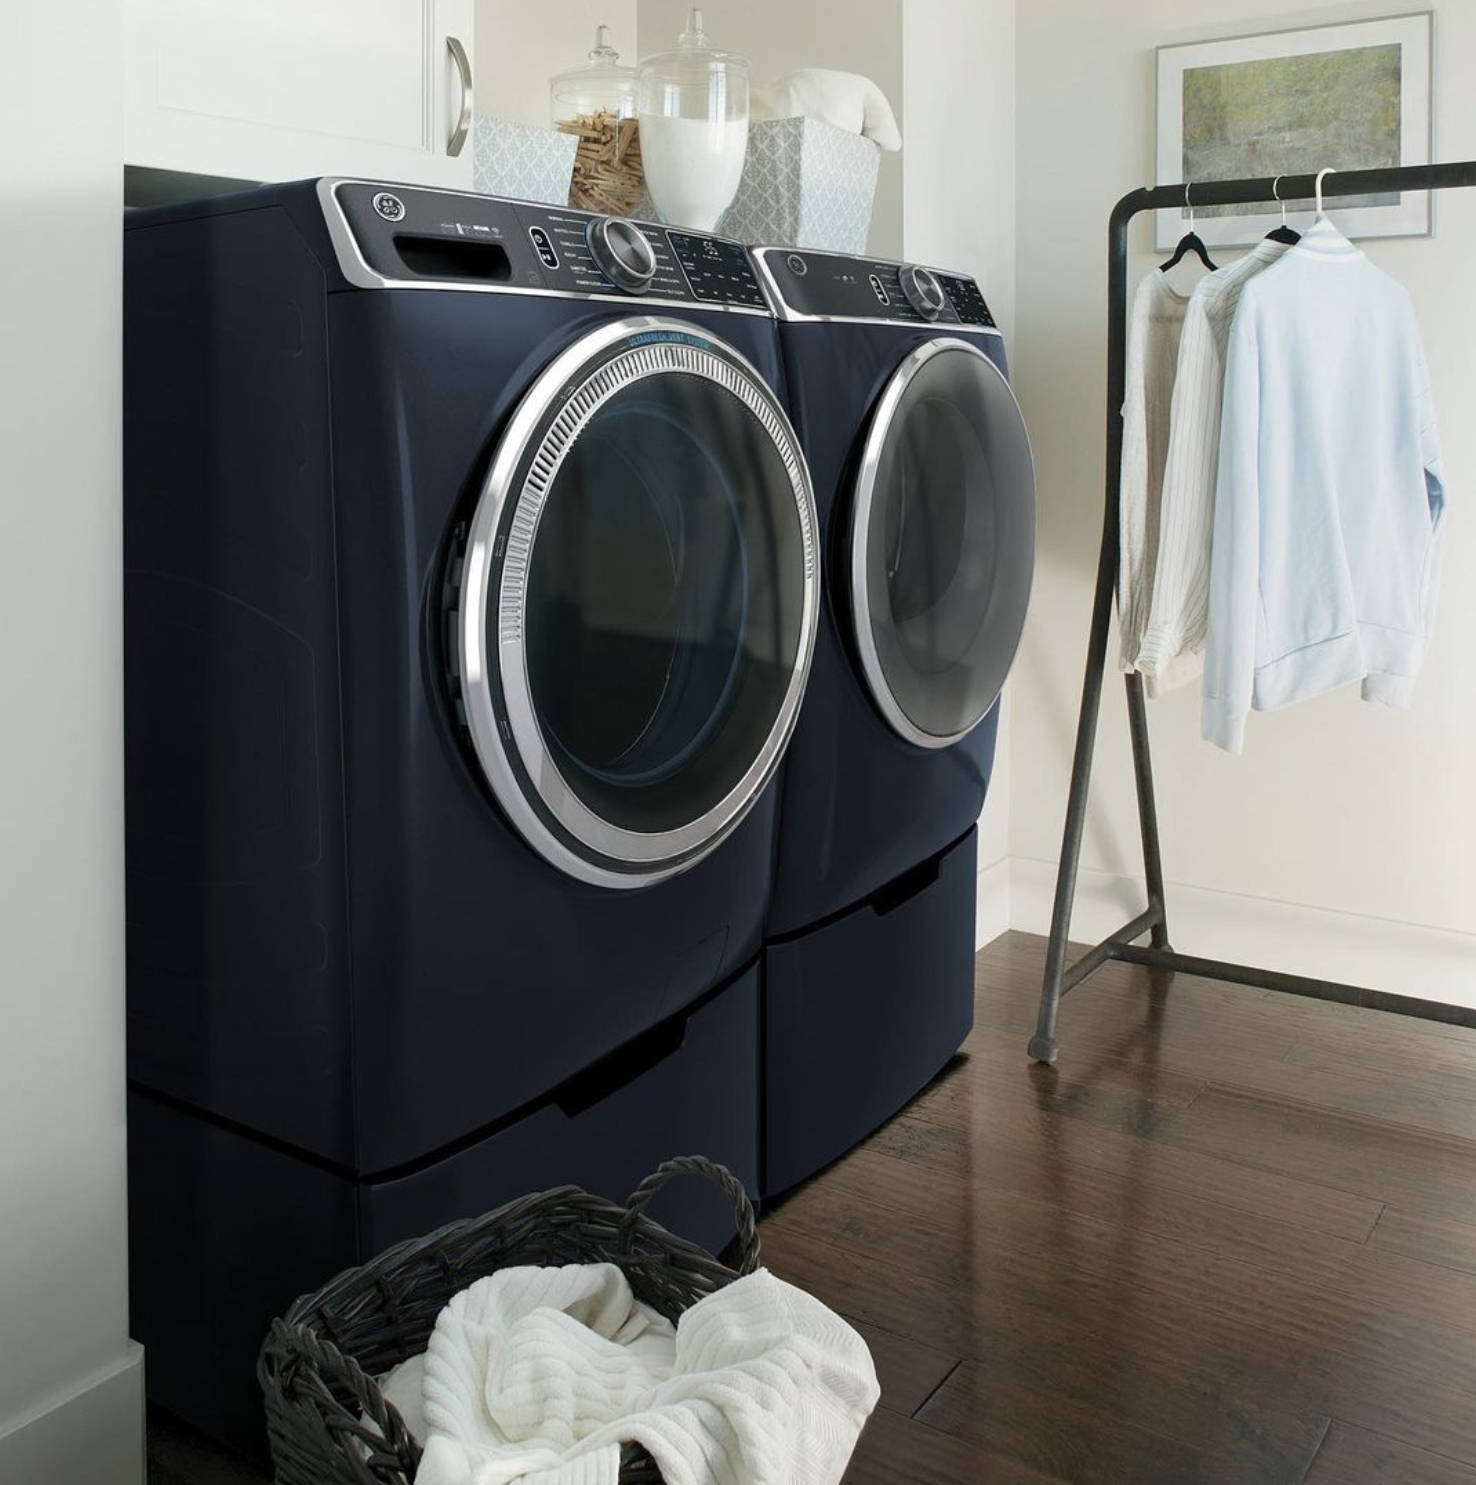 Grand Appliance Laundry Capacity Guide